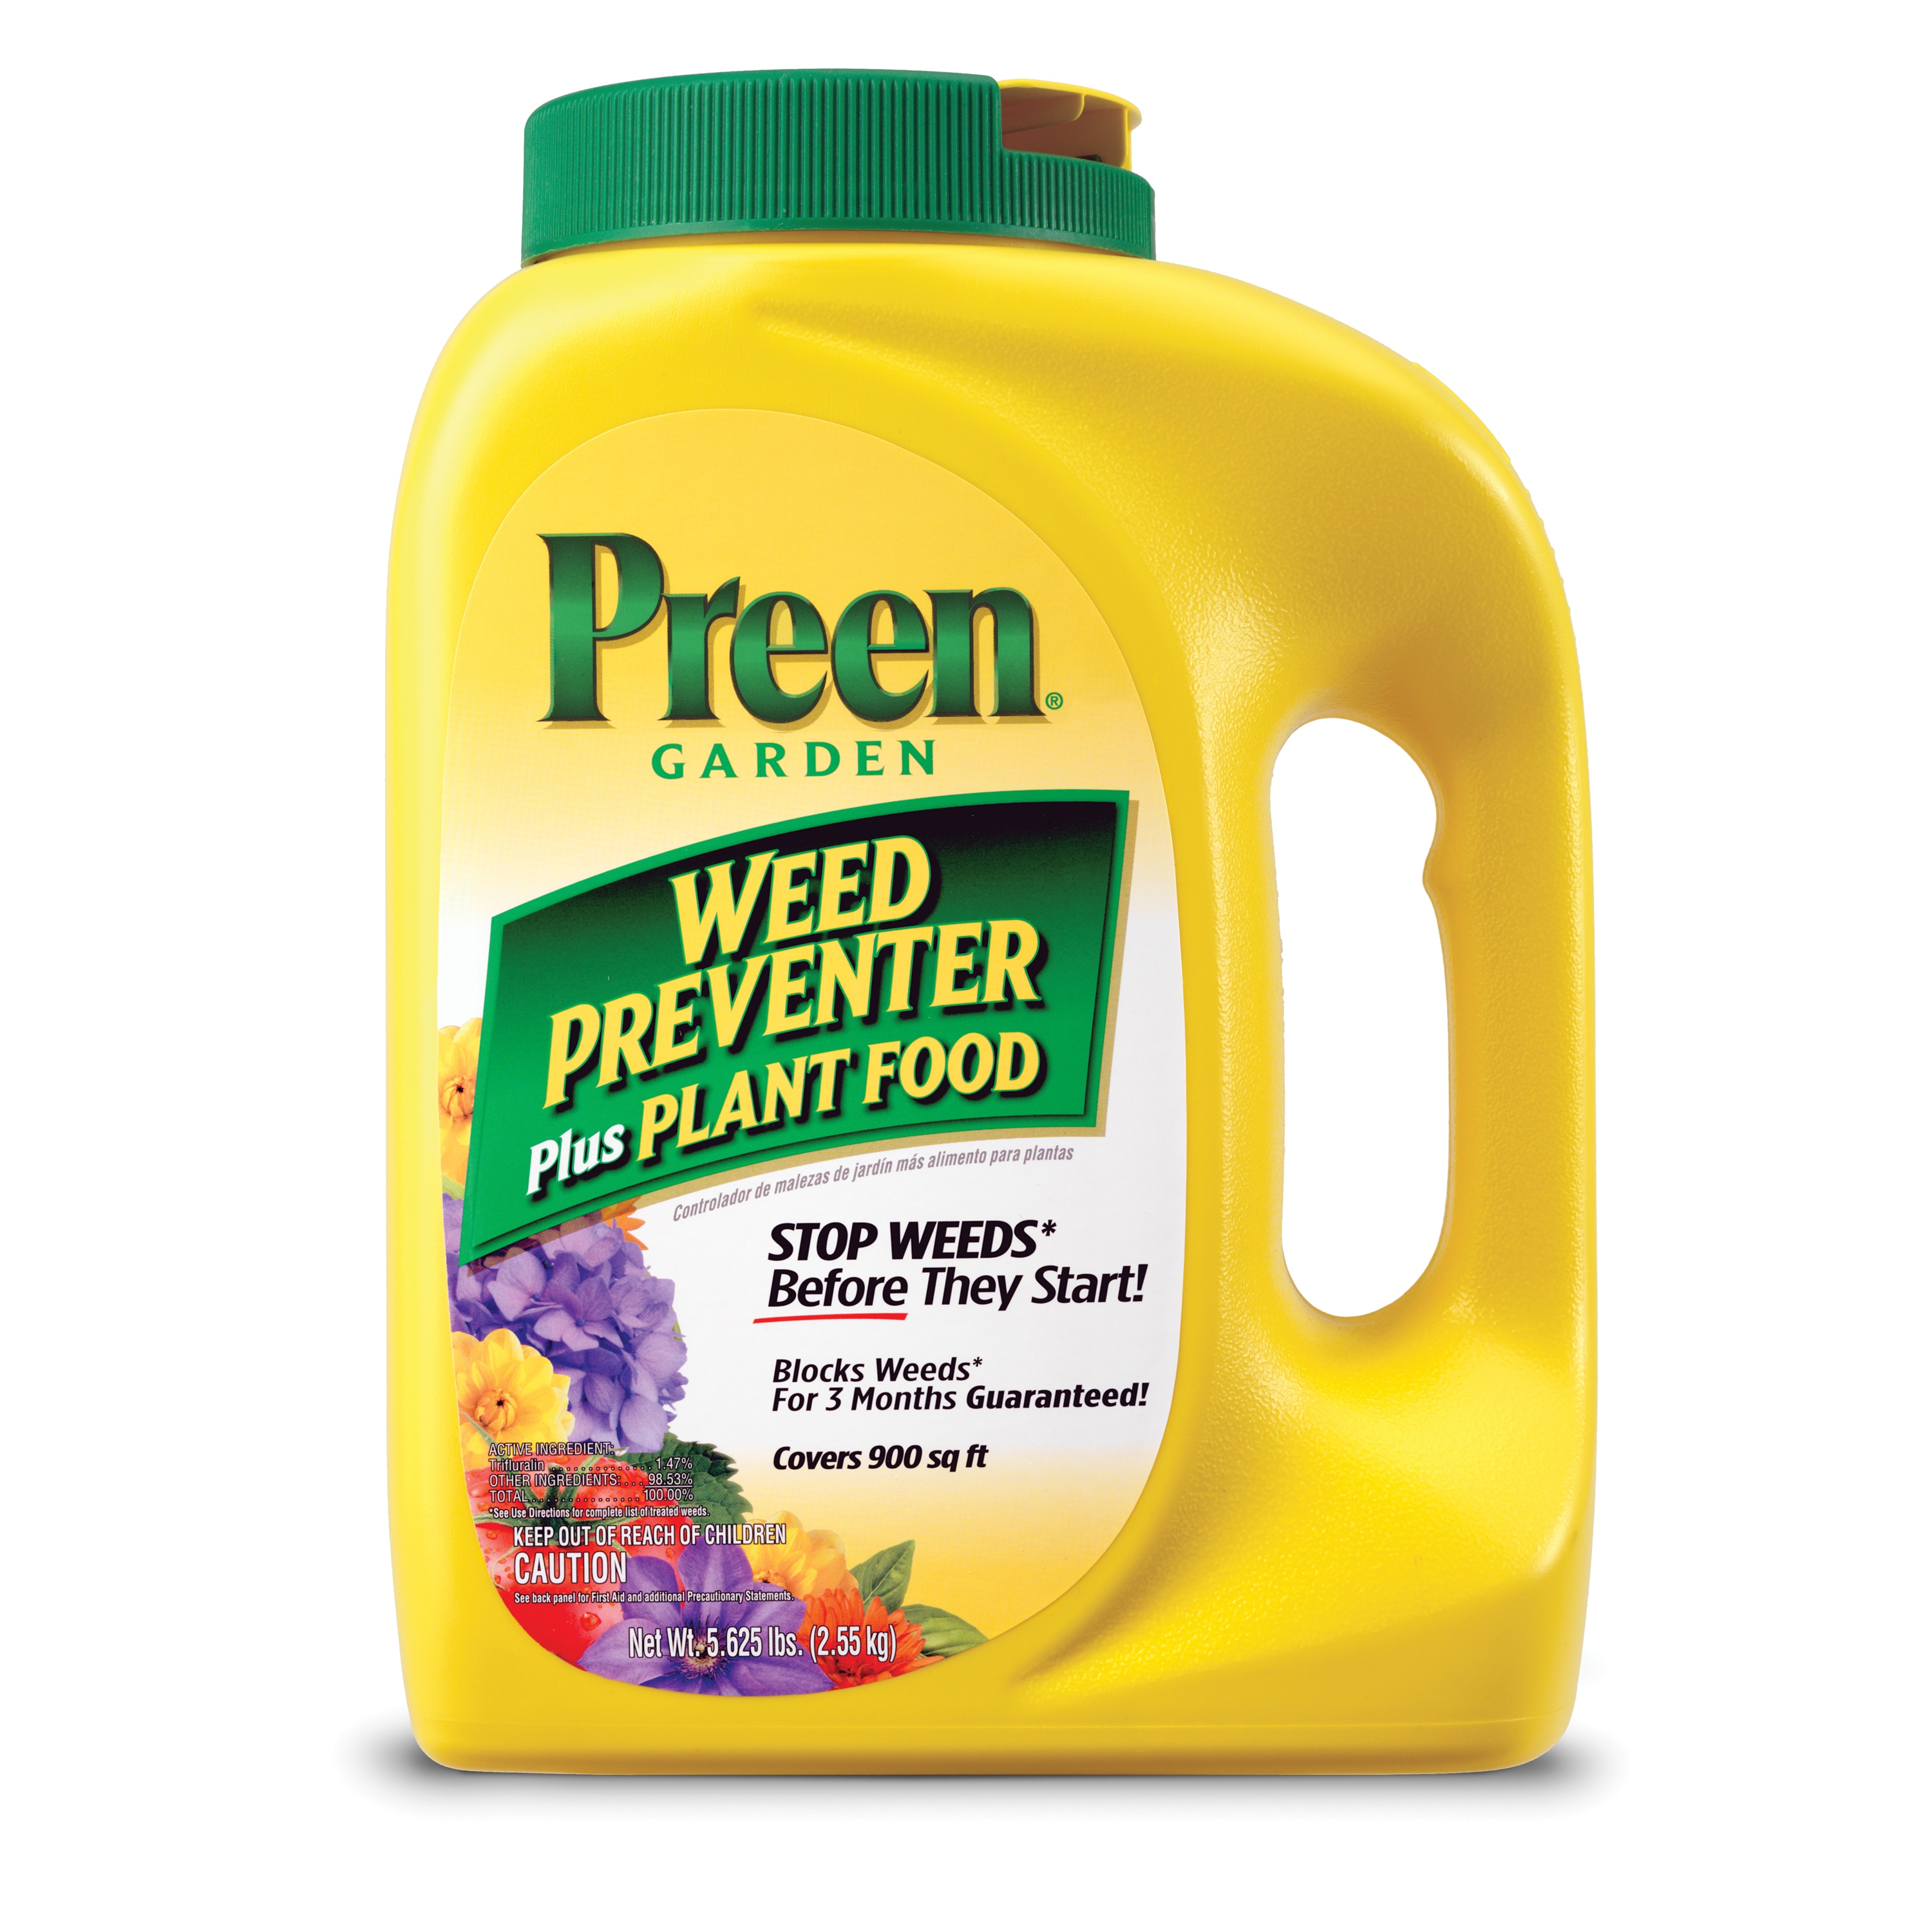 Image of Preen Garden Weed Preventer at Lowes